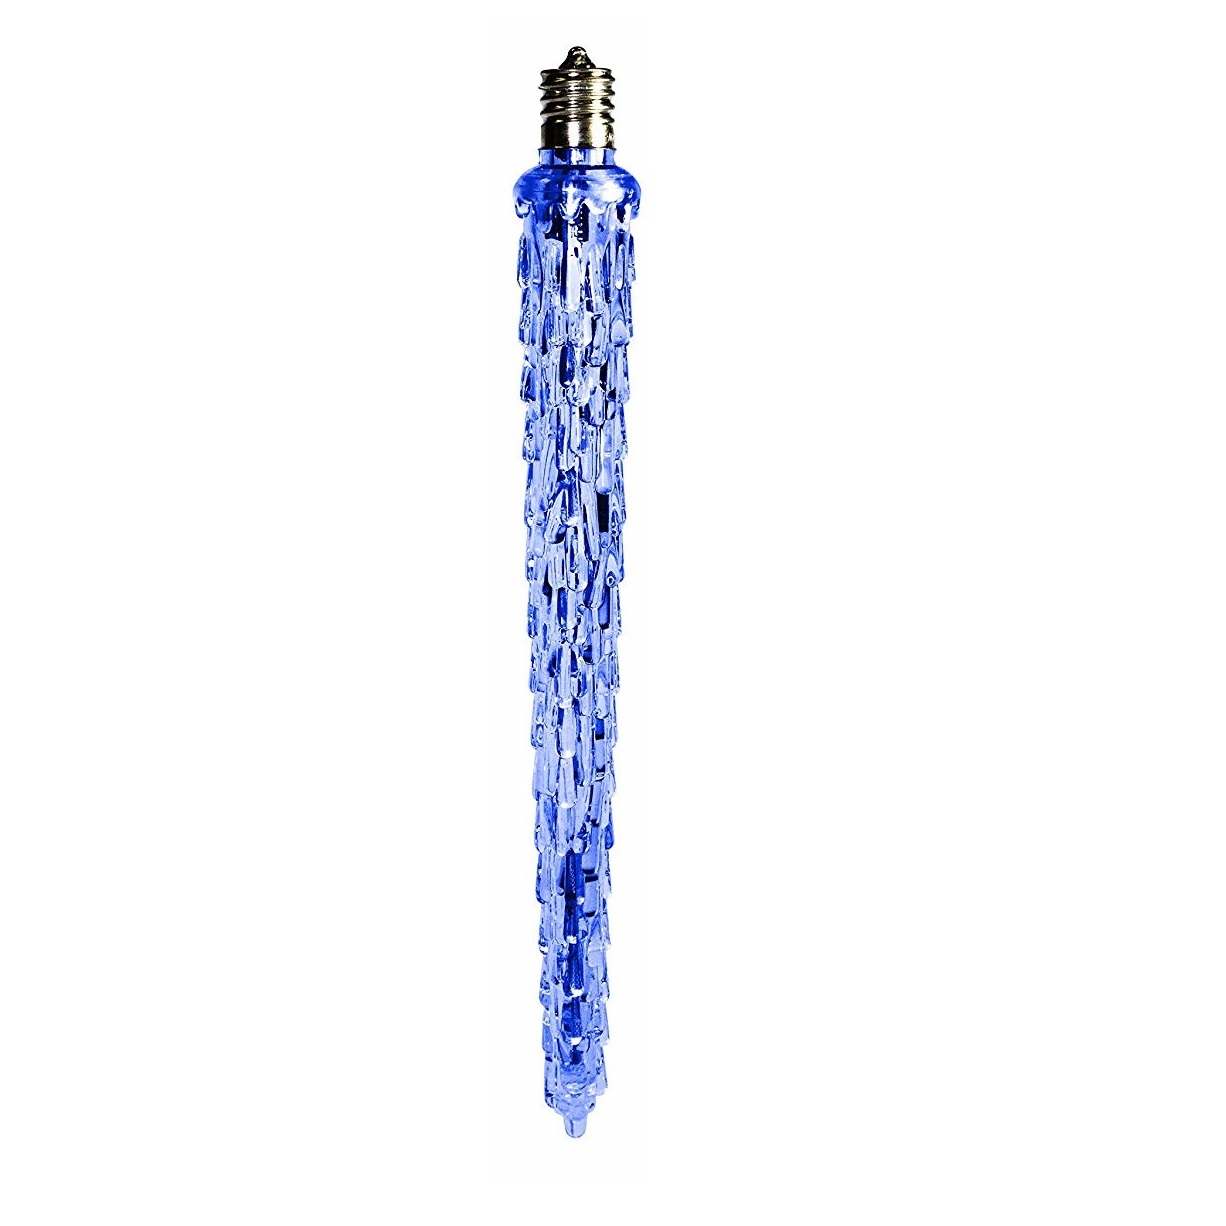 9 Inch LED C7 Steady Blue Icicle Christmas Light Replacement Bulb